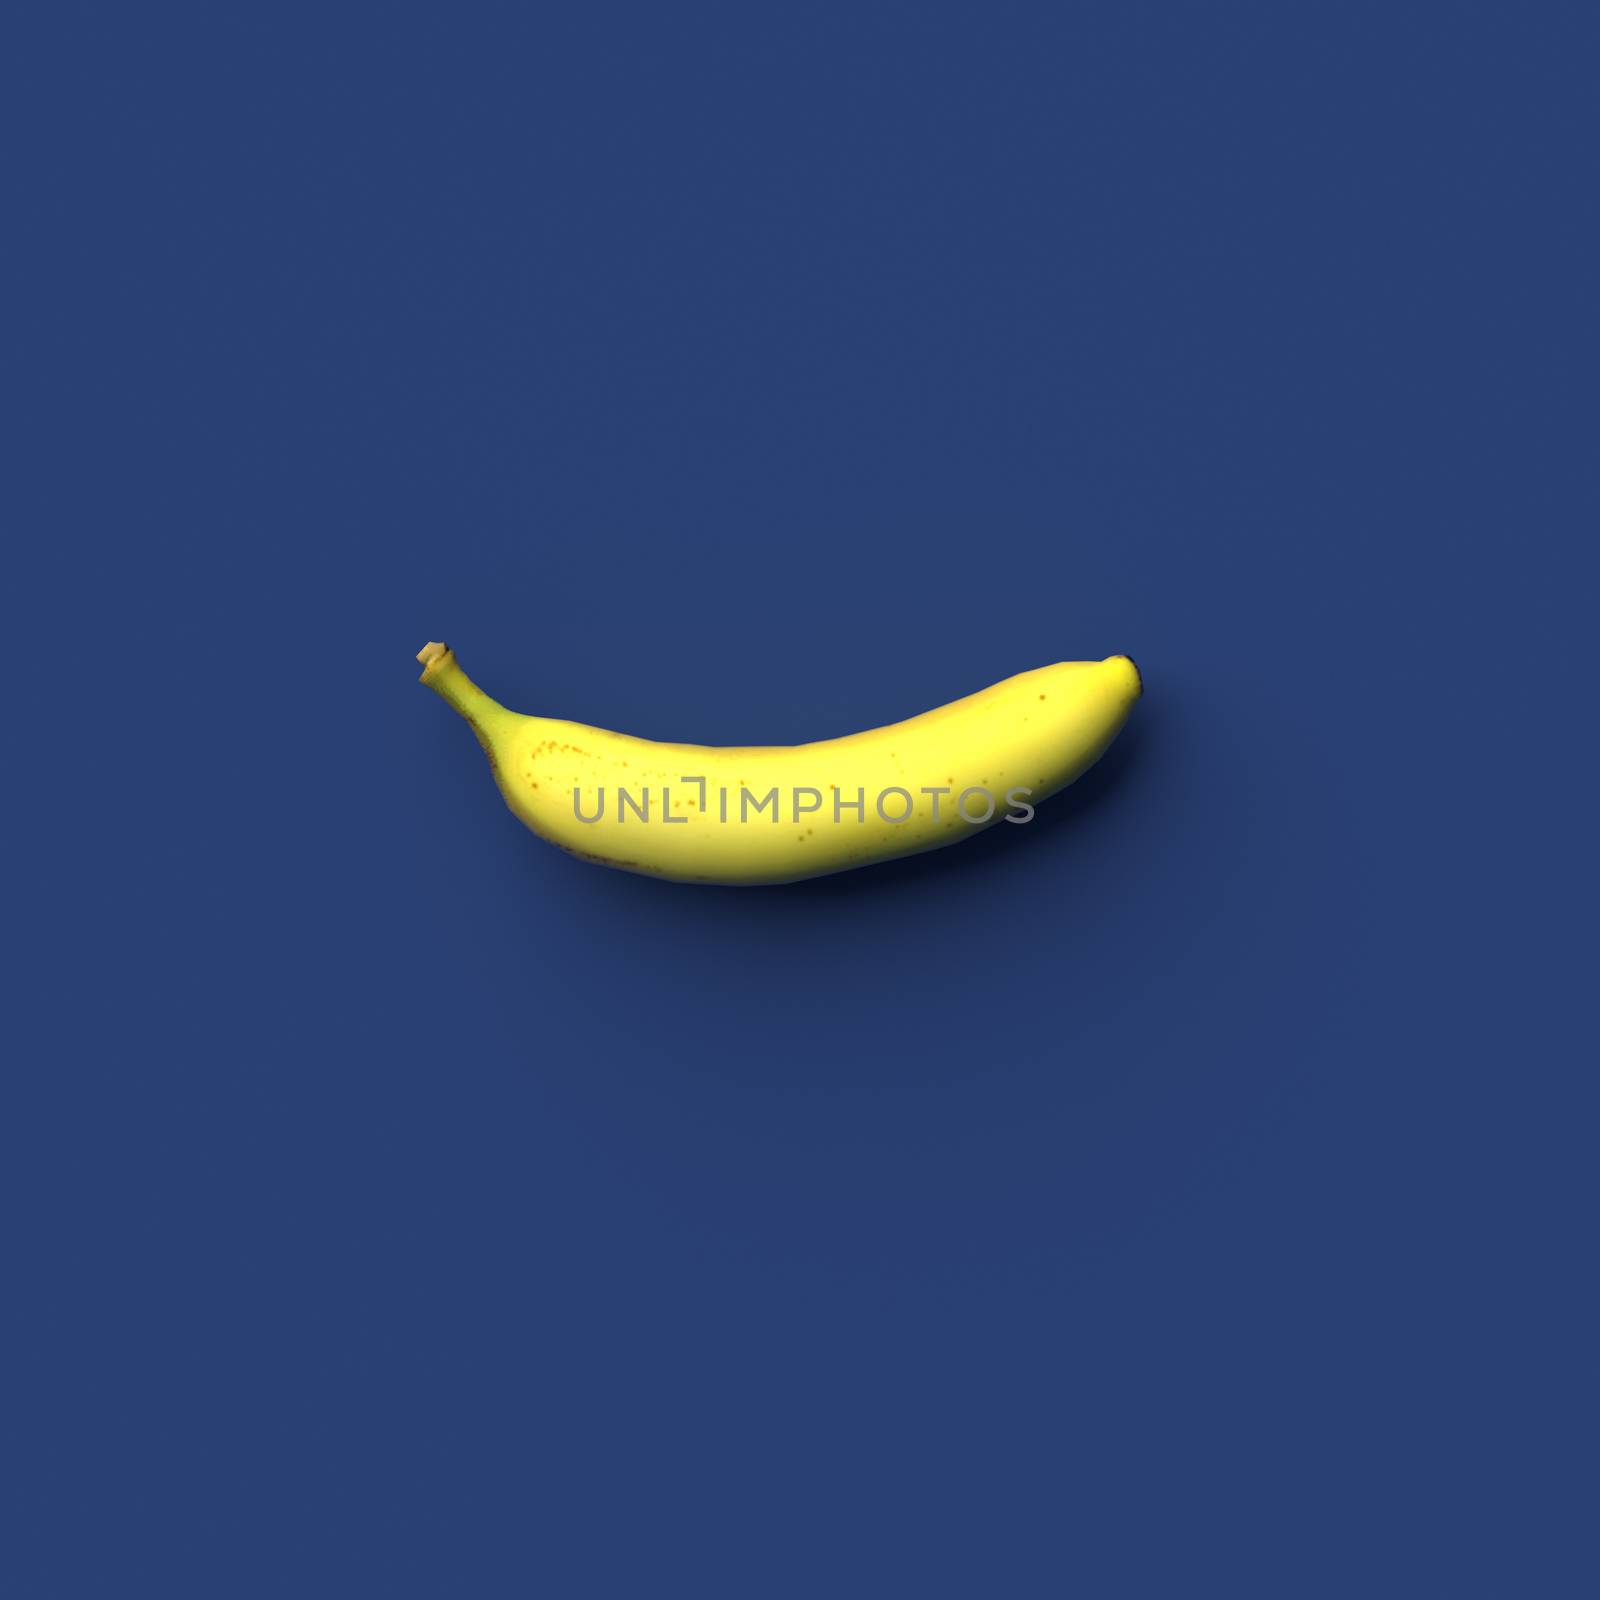 3D RENDERING OF A BANANA ON PLAIN BACKGROUND by PrettyTG